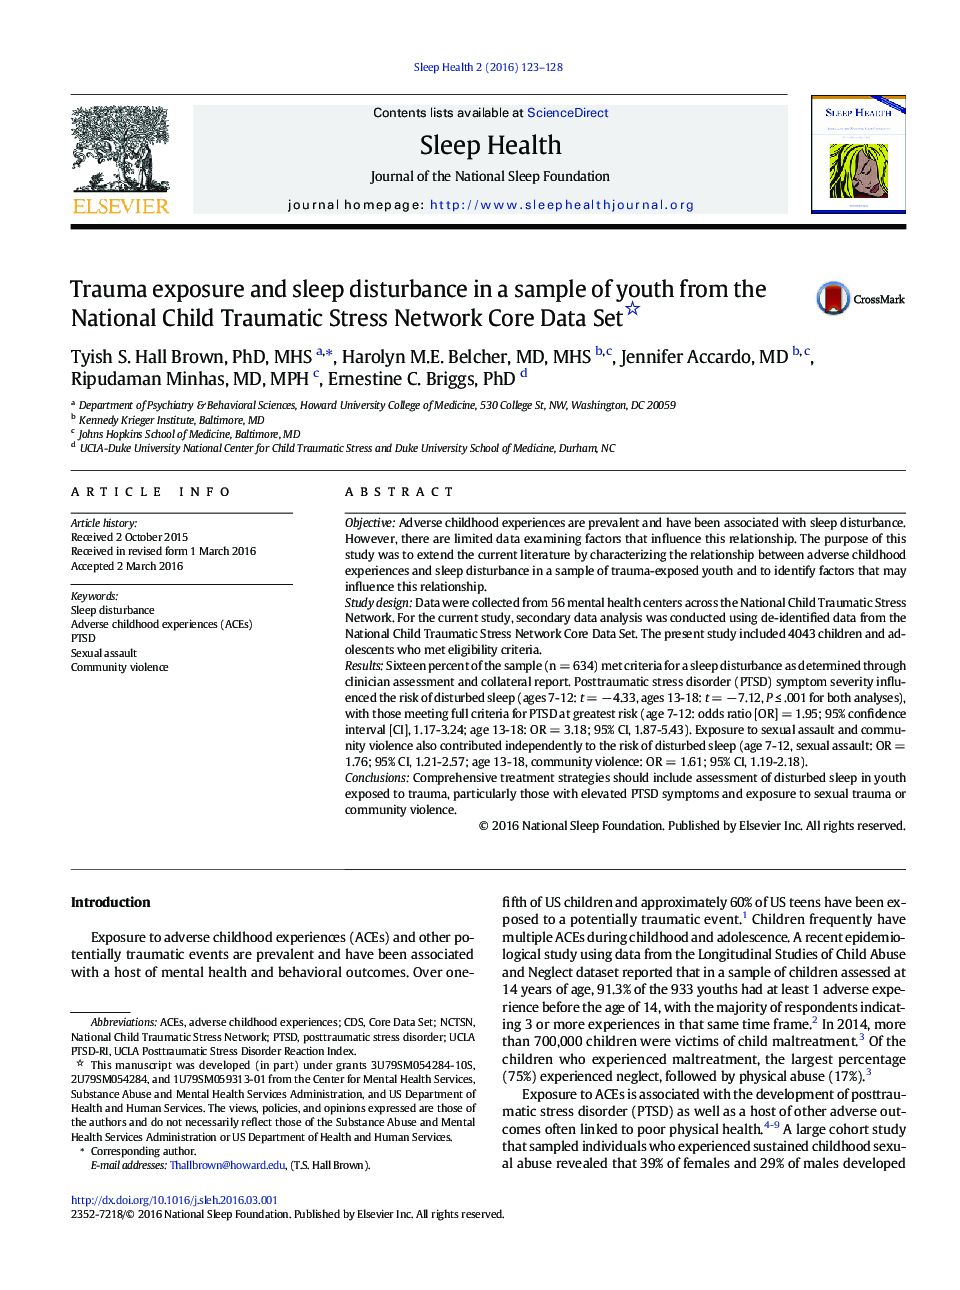 Trauma exposure and sleep disturbance in a sample of youth from the National Child Traumatic Stress Network Core Data Set 